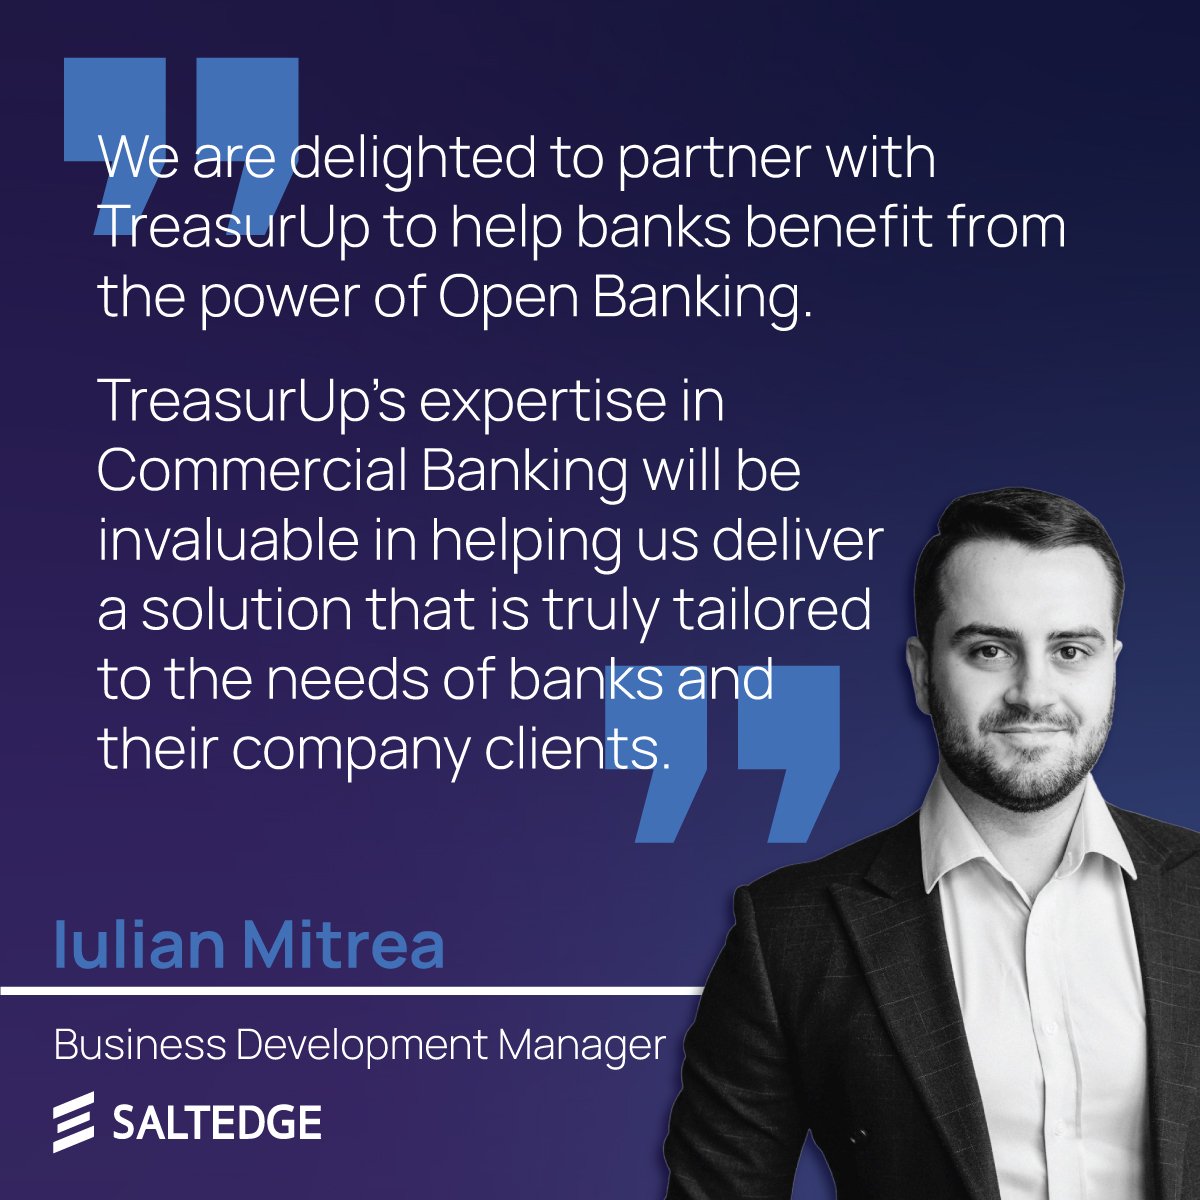 A screenshot of a quote from Iulian Mitrea, a spokesperson from Salt Edge, sharing insights about their partnership with TreasurUp.